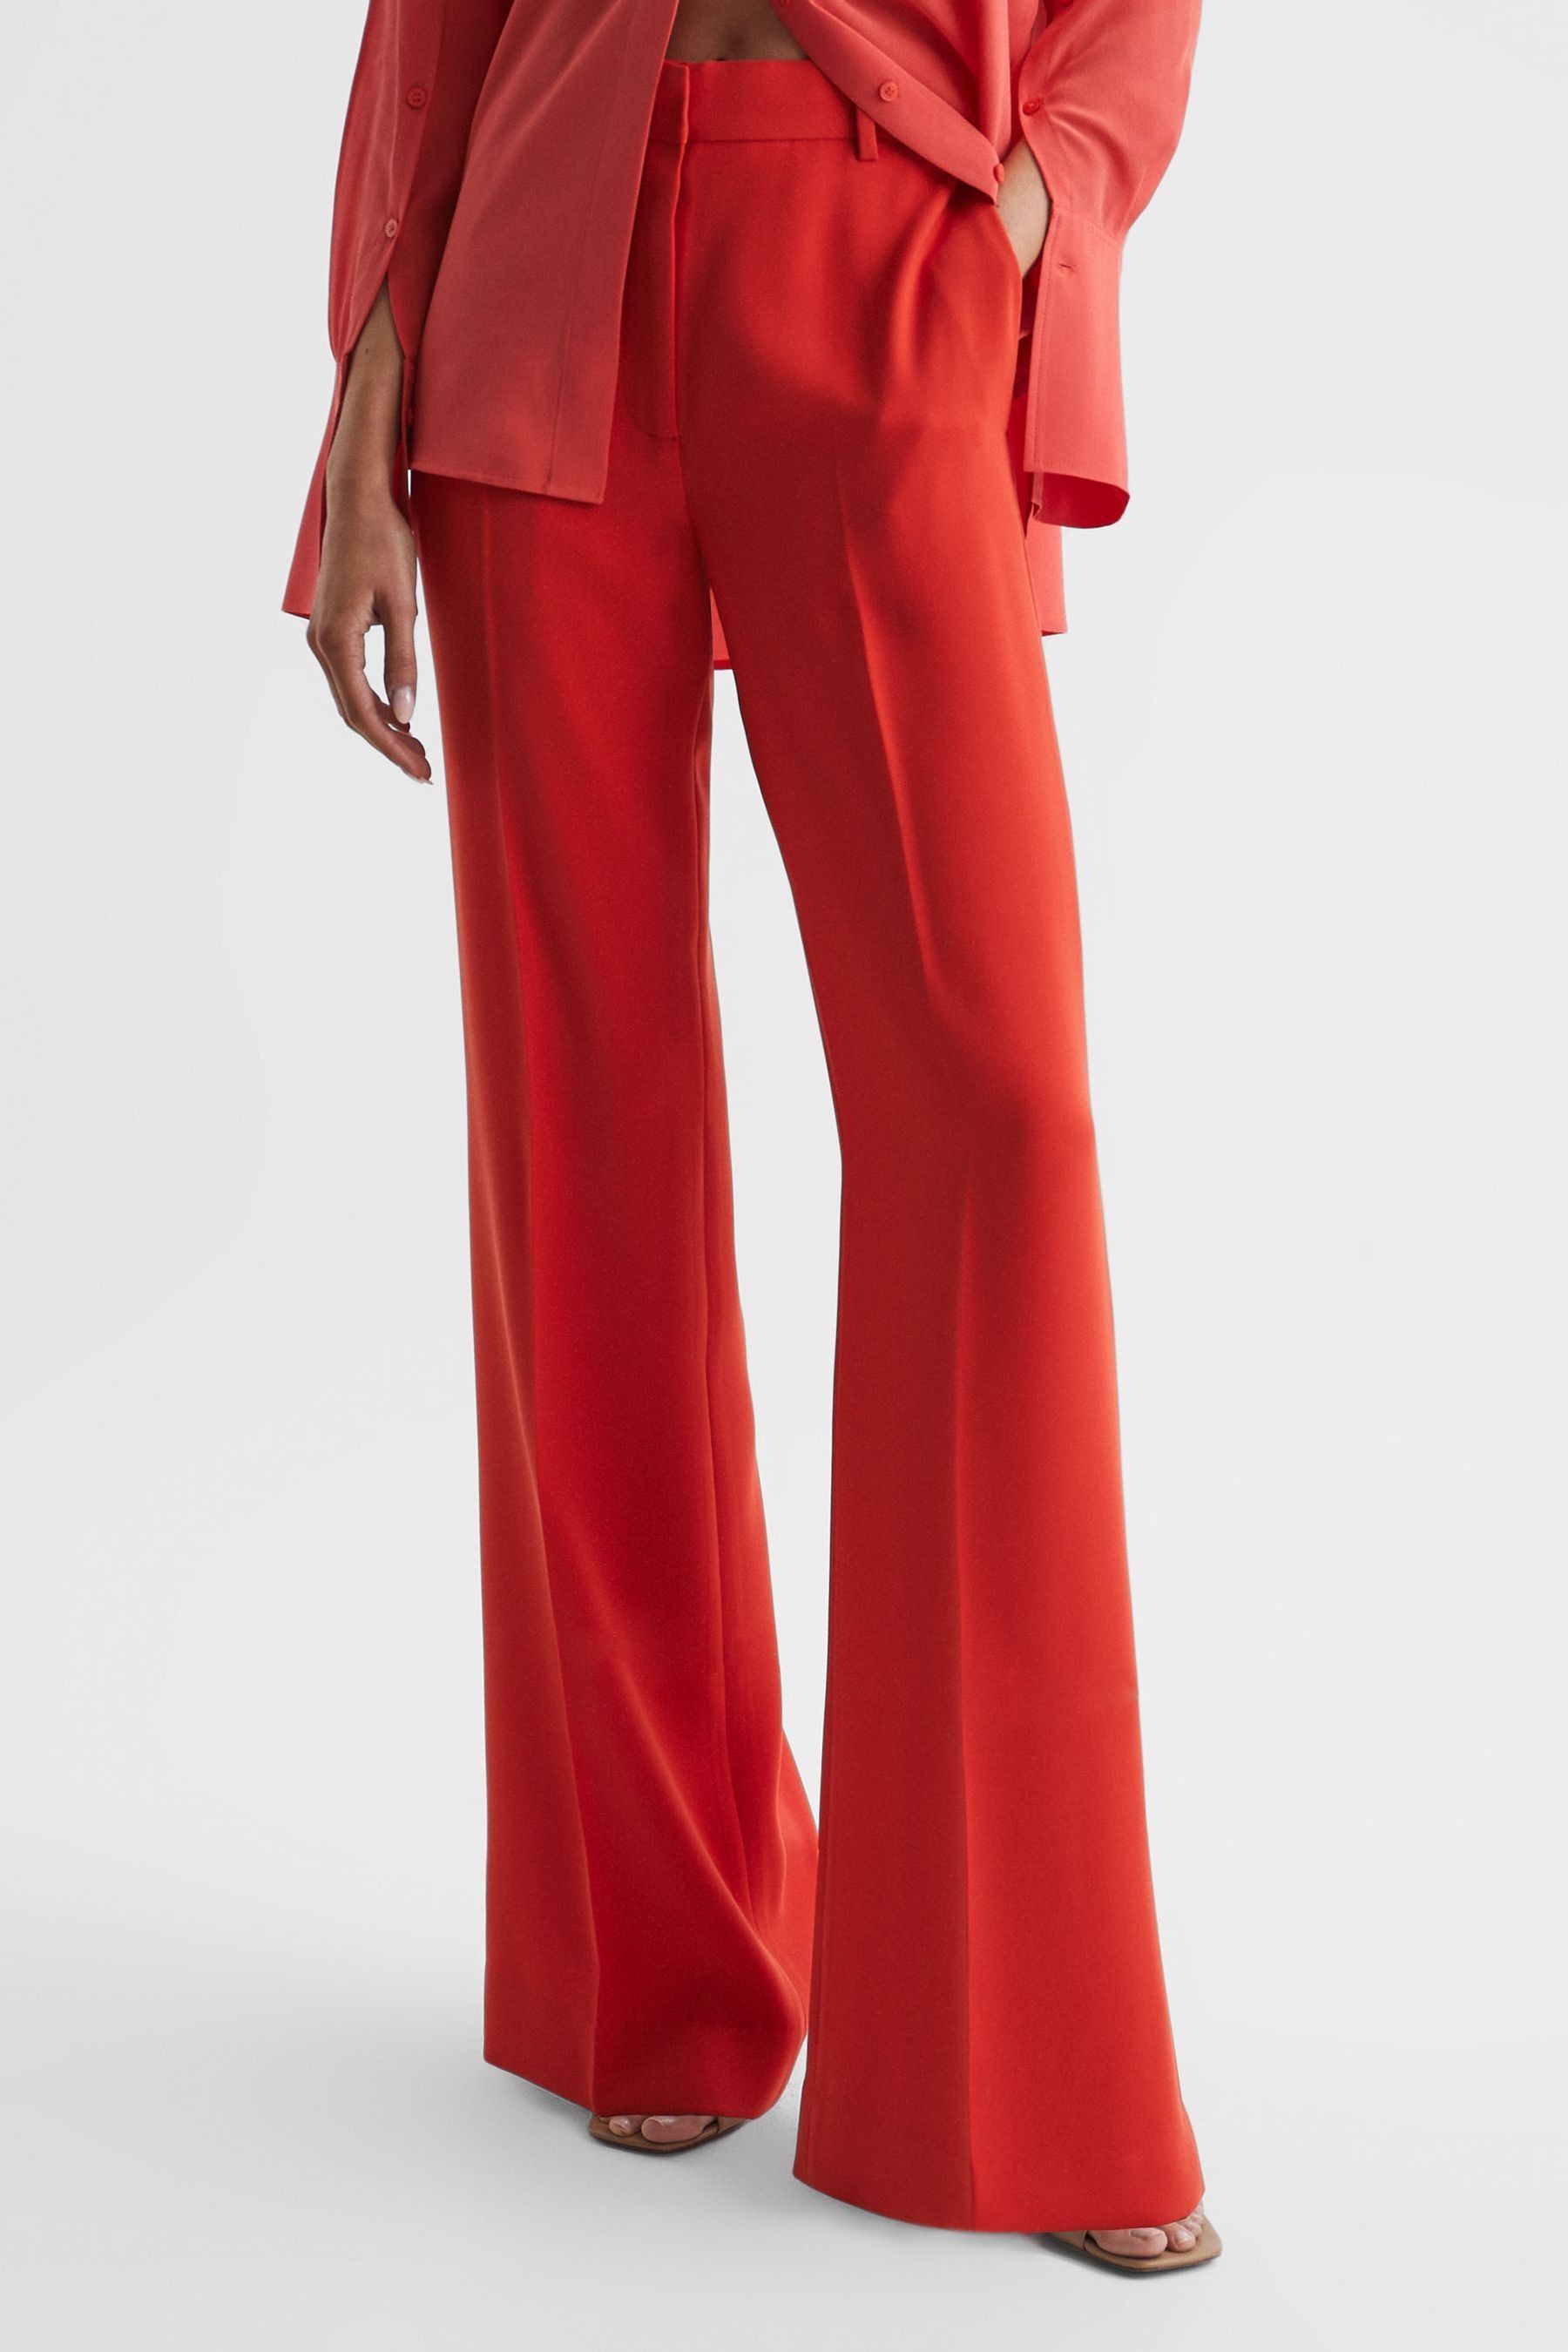 Buy Reiss Coral Maia Wide Leg Trousers from the Next UK online shop